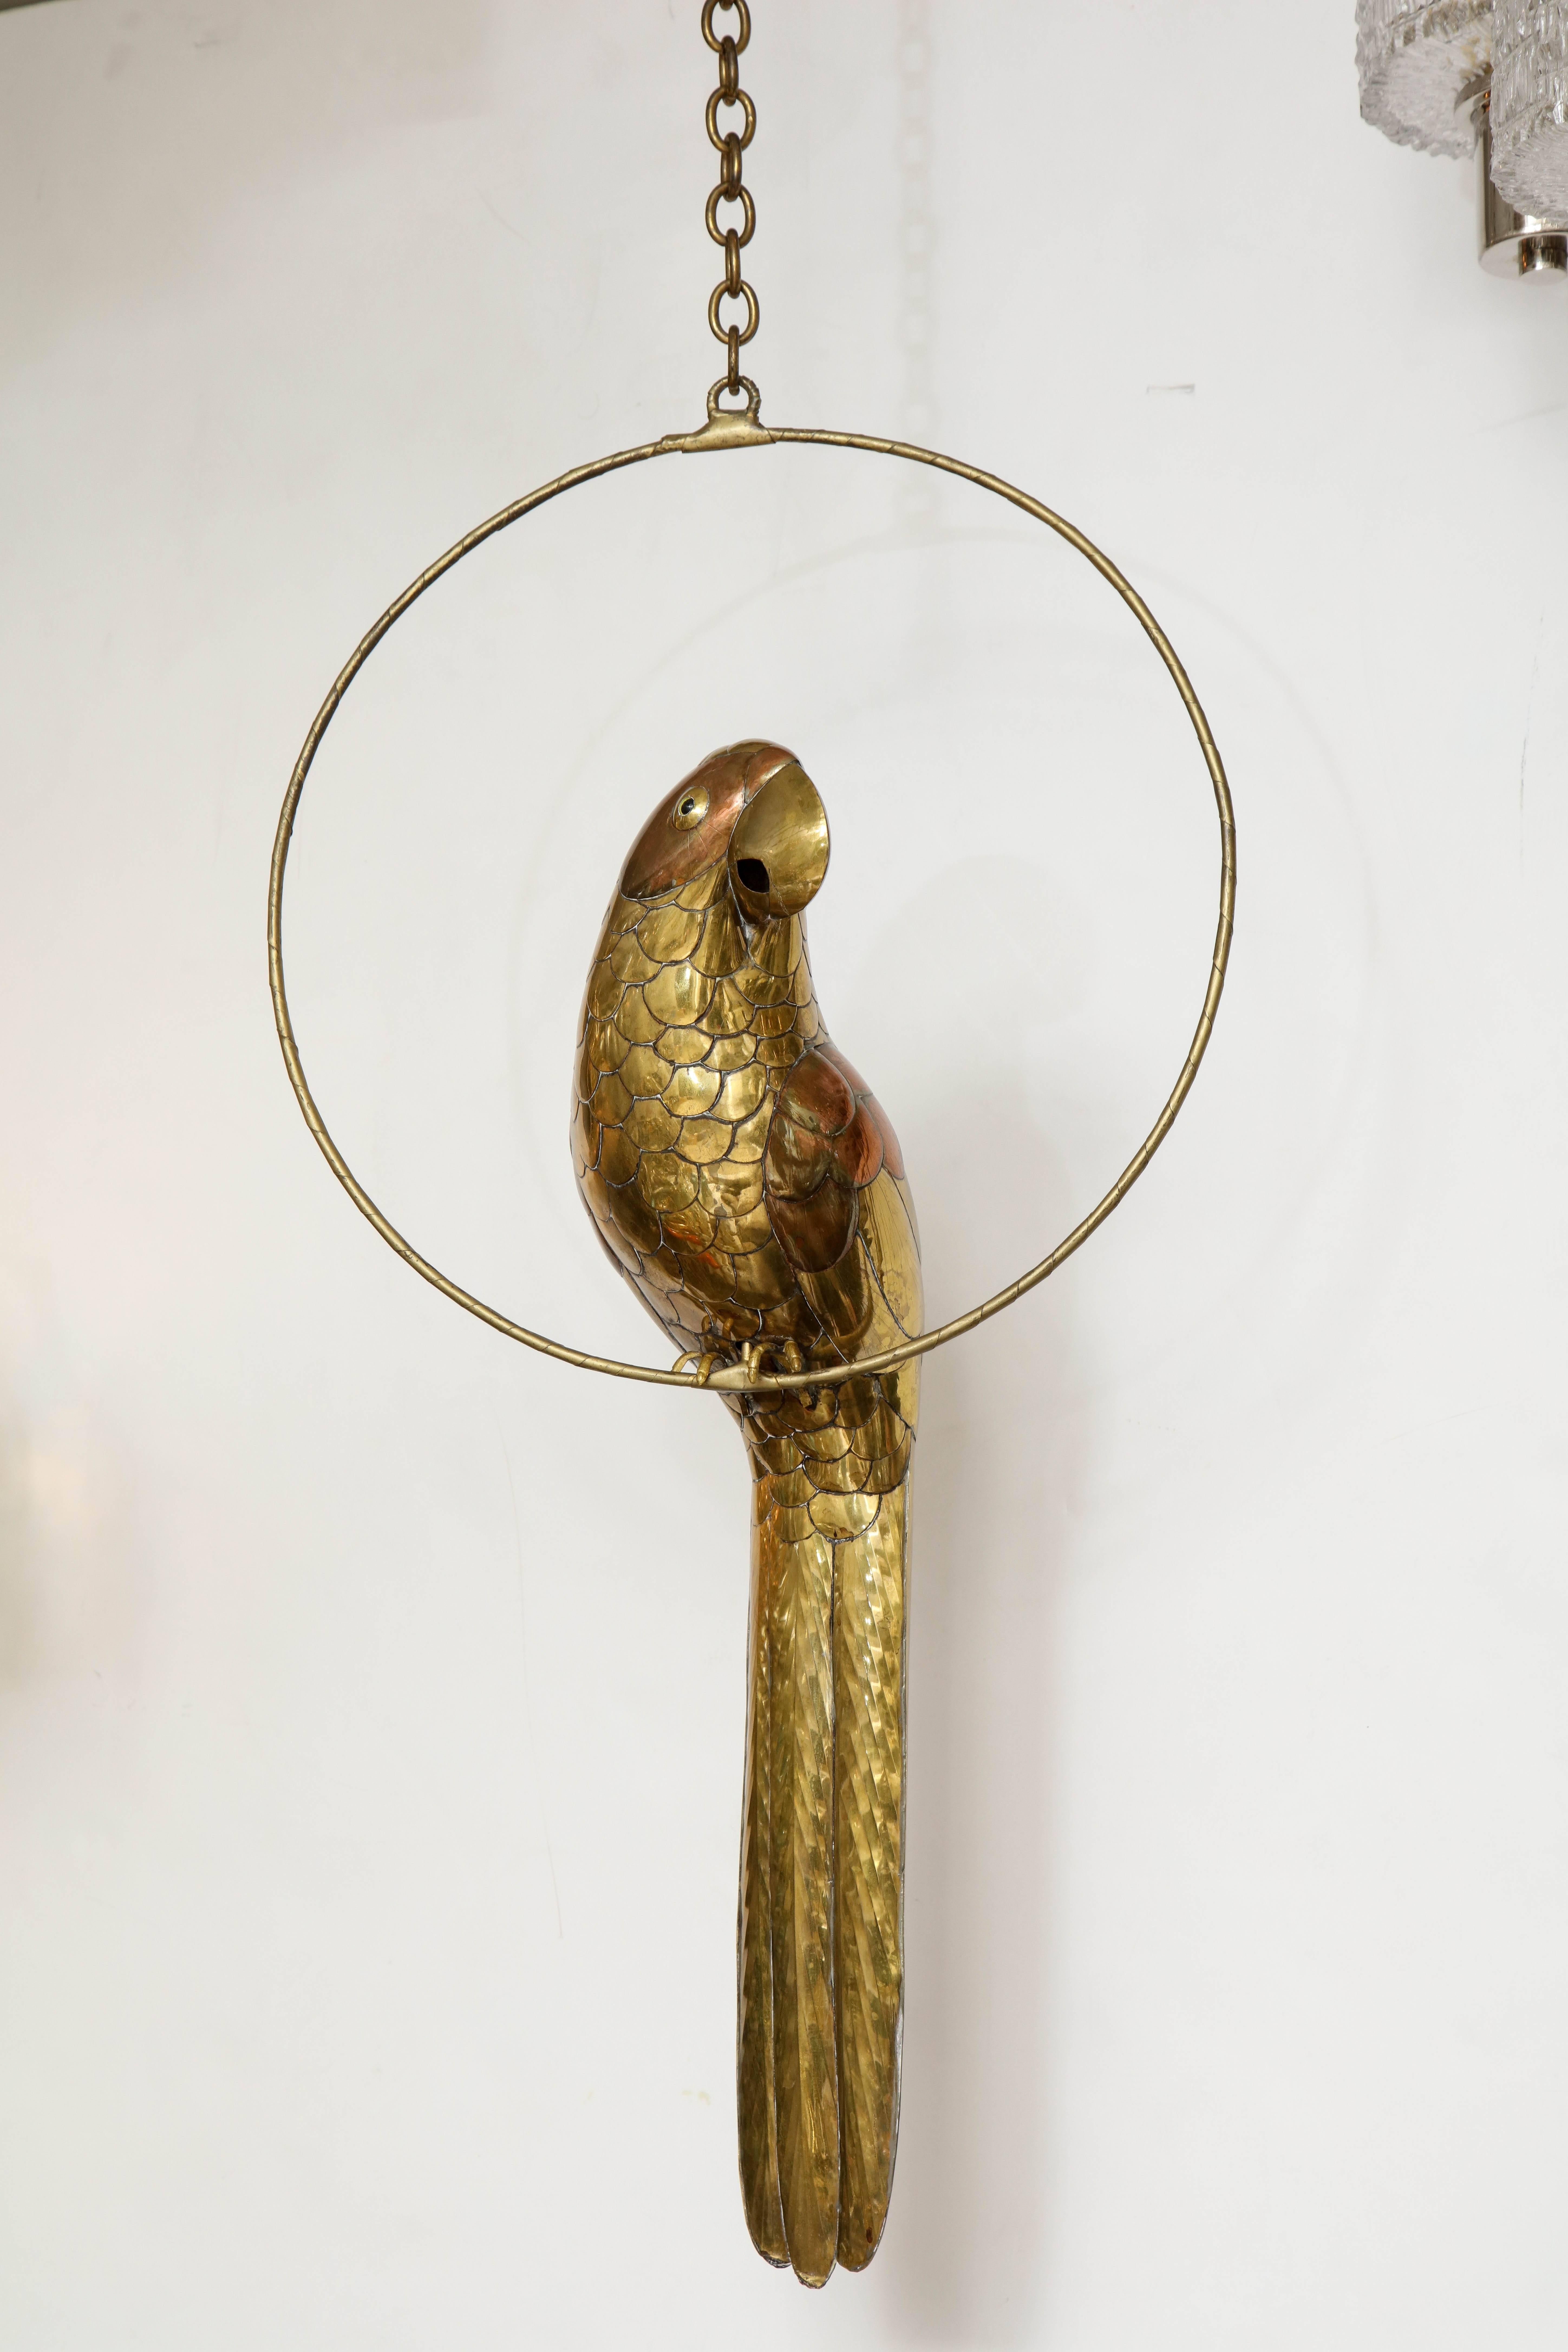 Midcentury brass or copper stylized parrot sitting on brass ring with original brass chain. 

Measures: 51